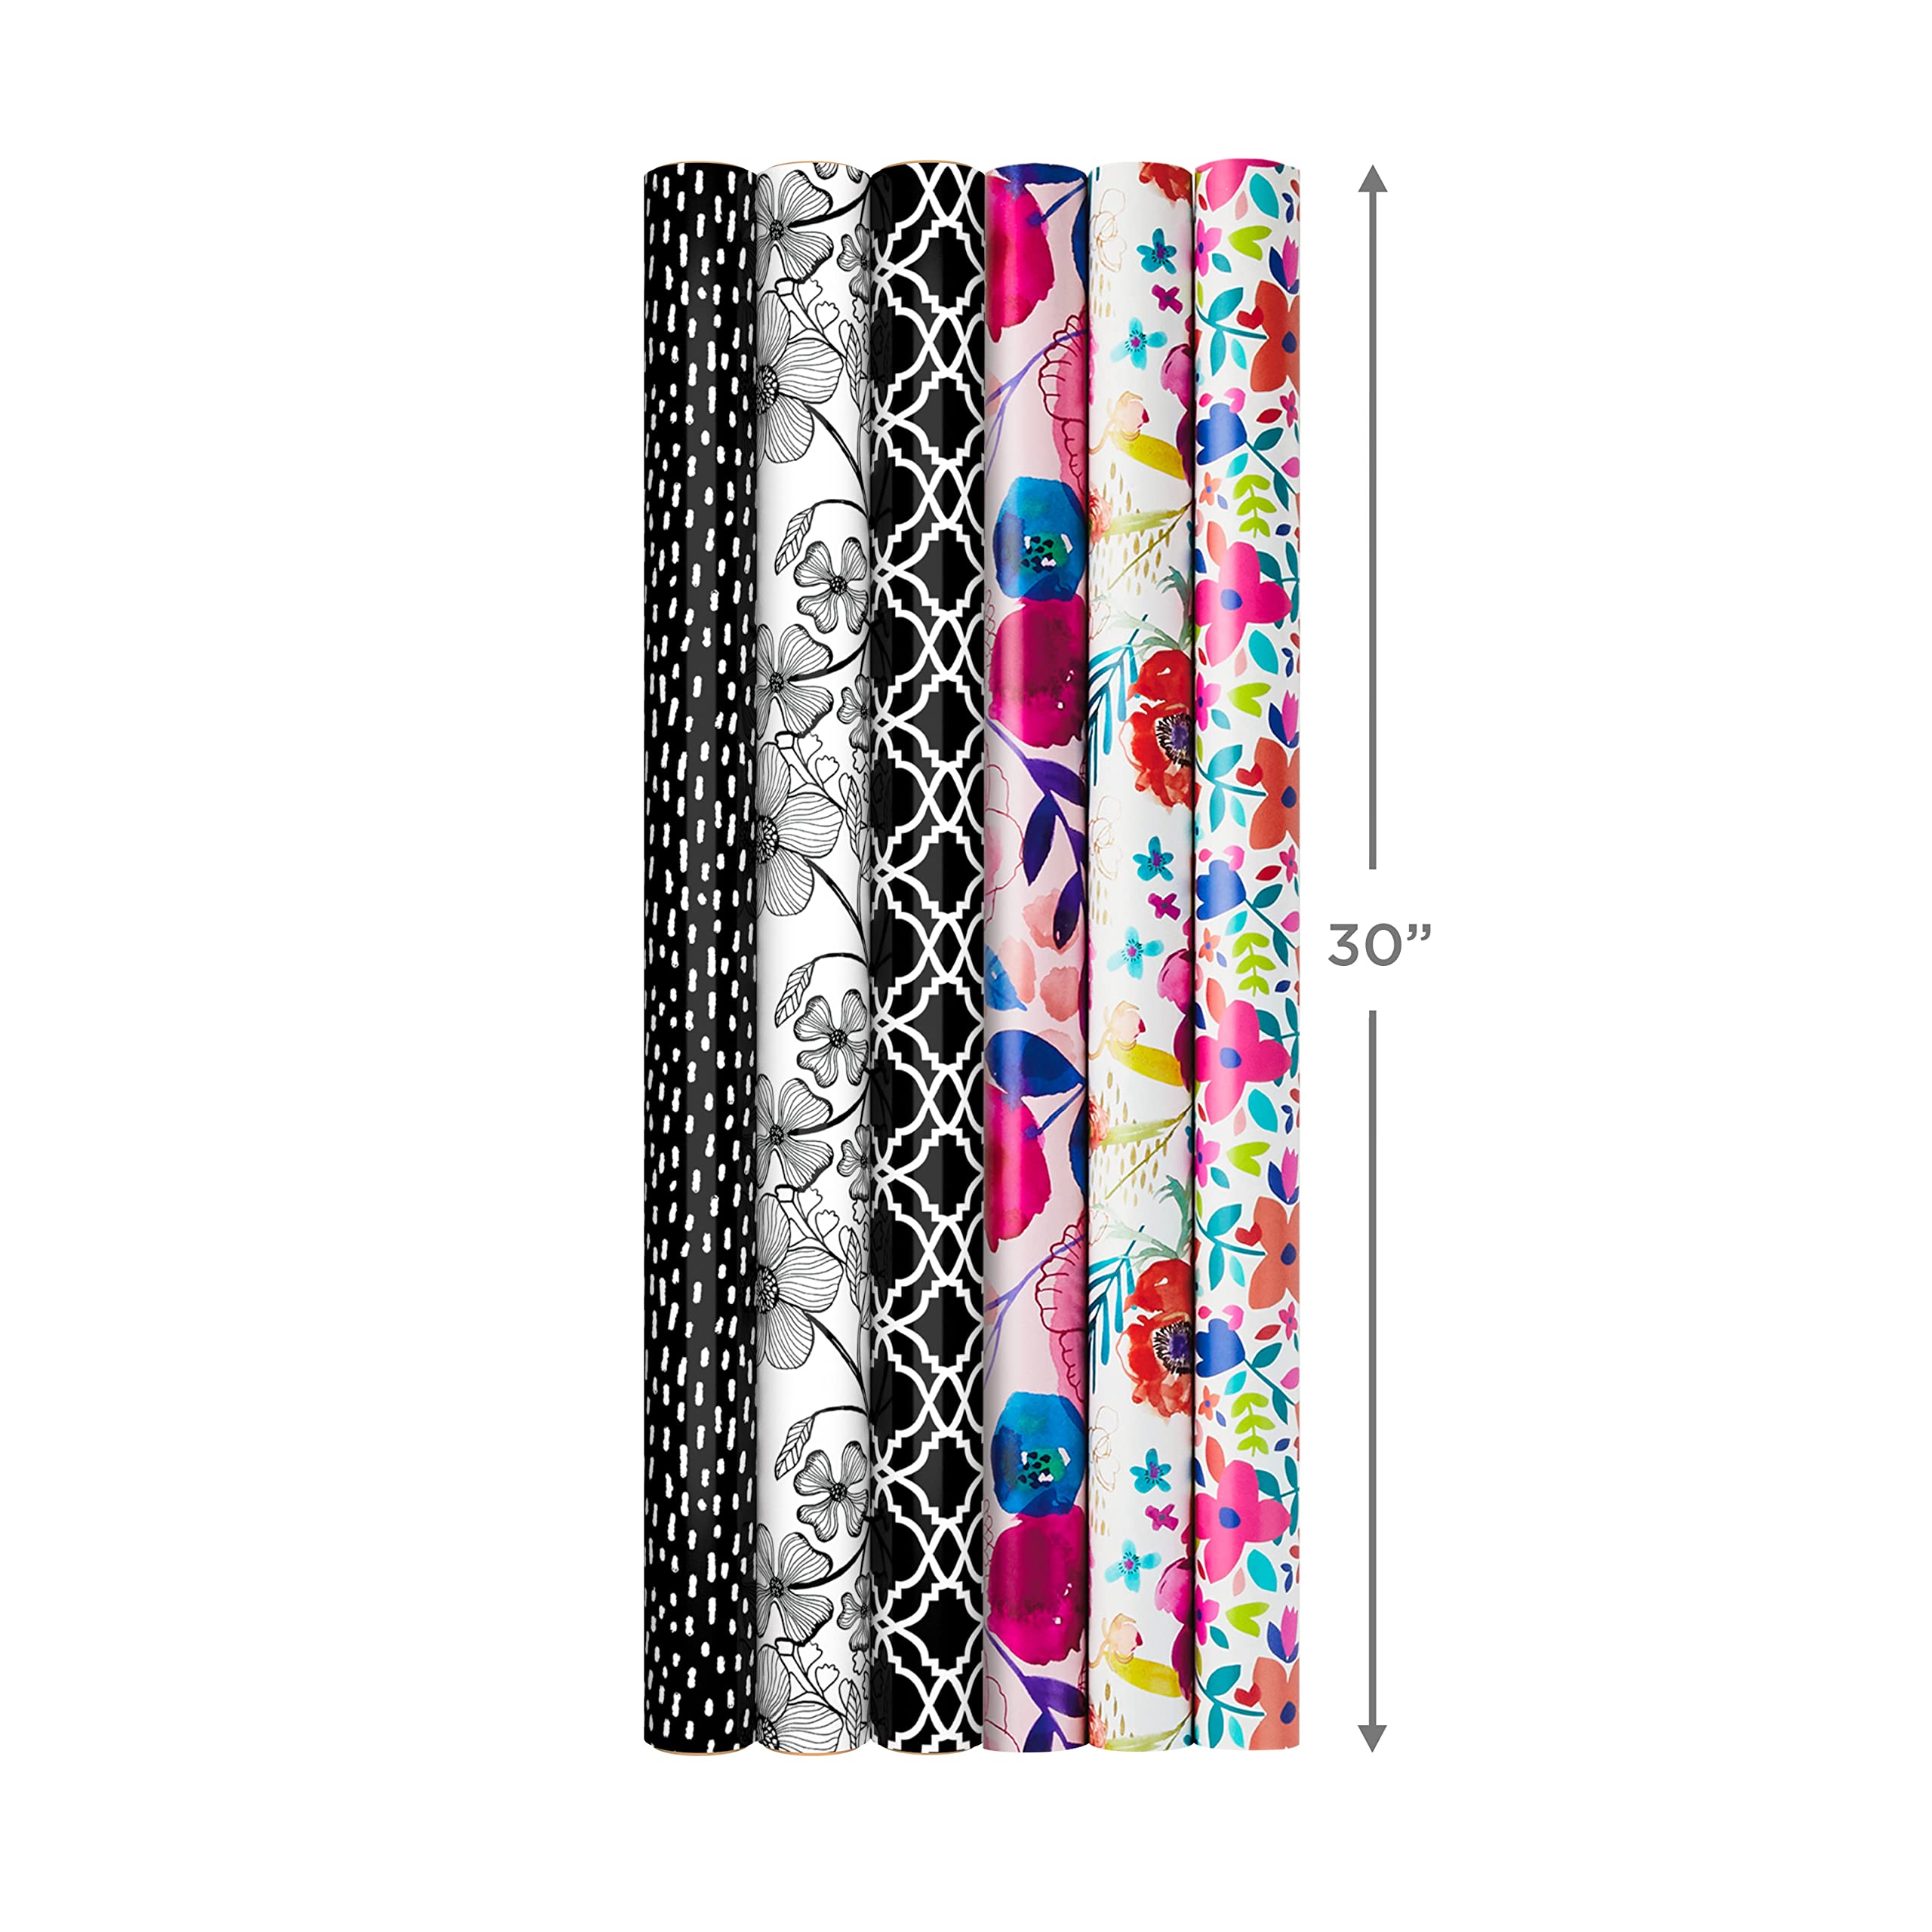 Hallmark Reversible Wrapping Paper Bundle (6 Rolls: 195 Square Feet Total) Flowers & Polka Dots, Black and White, Pink and Blue for Birthdays, Weddings, Valentine's Day, Mother's Day, Baby Shower